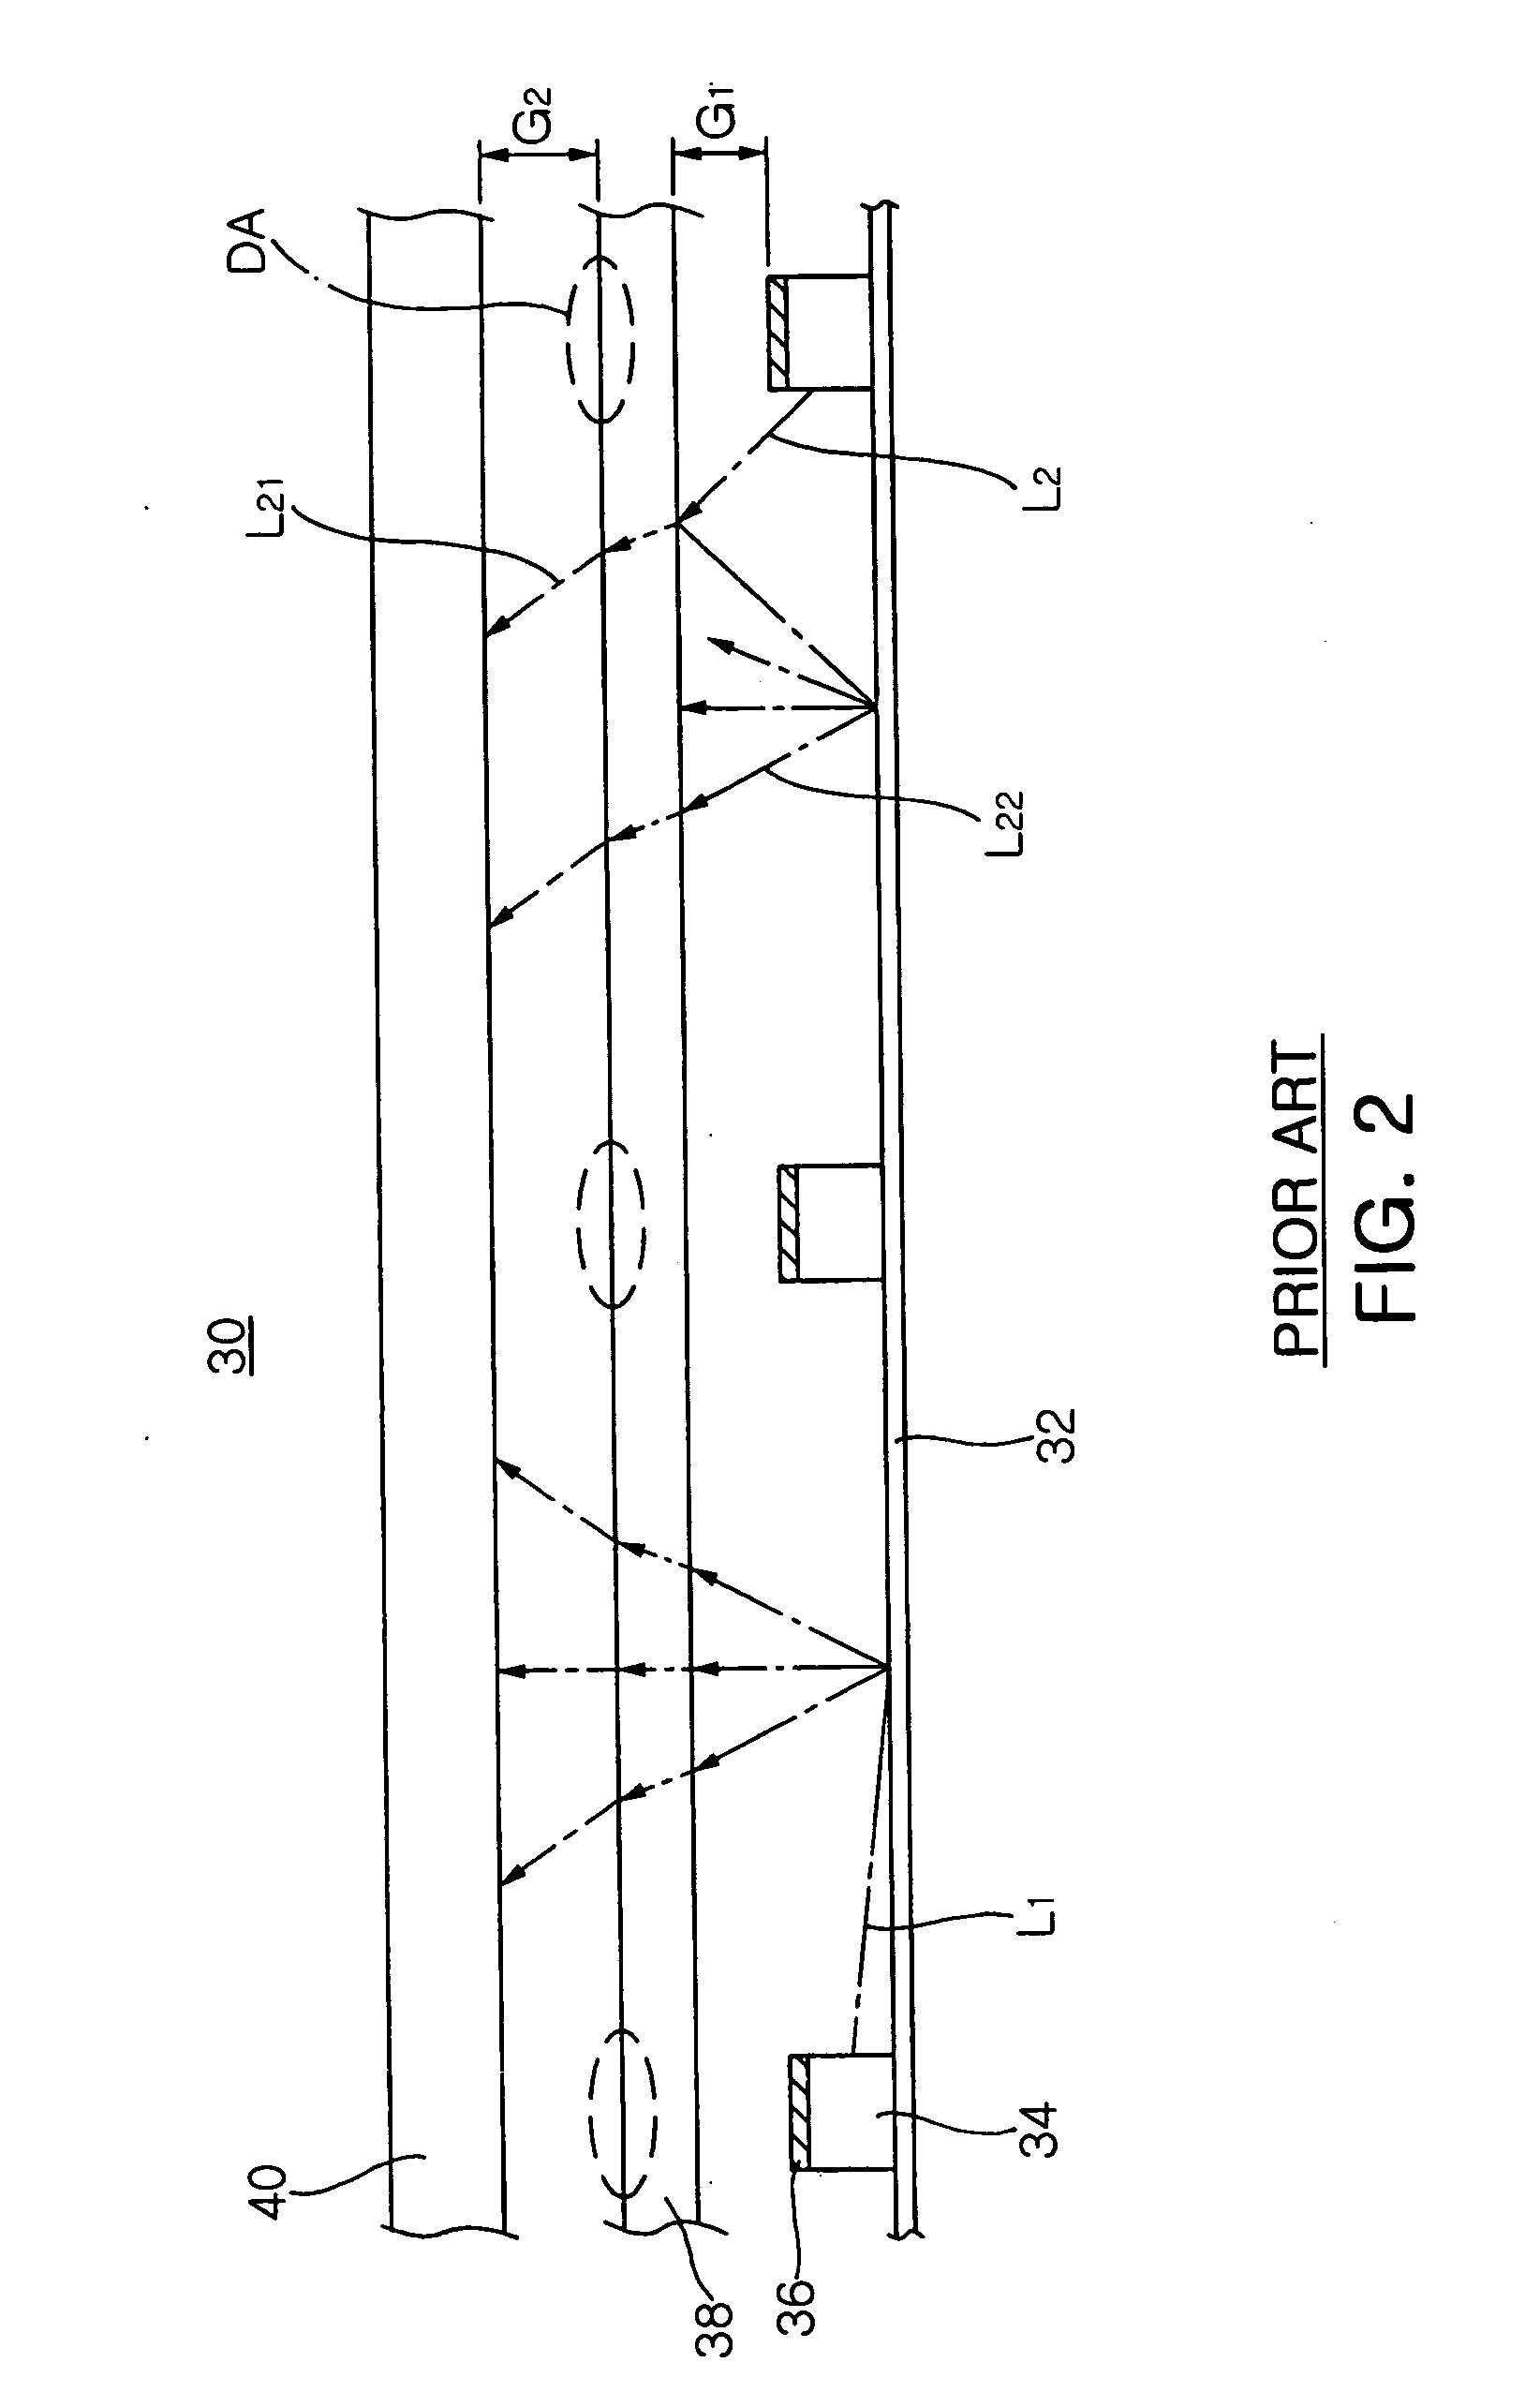 Direct-illumination backlight apparatus having transparent plate acting as light guide plate